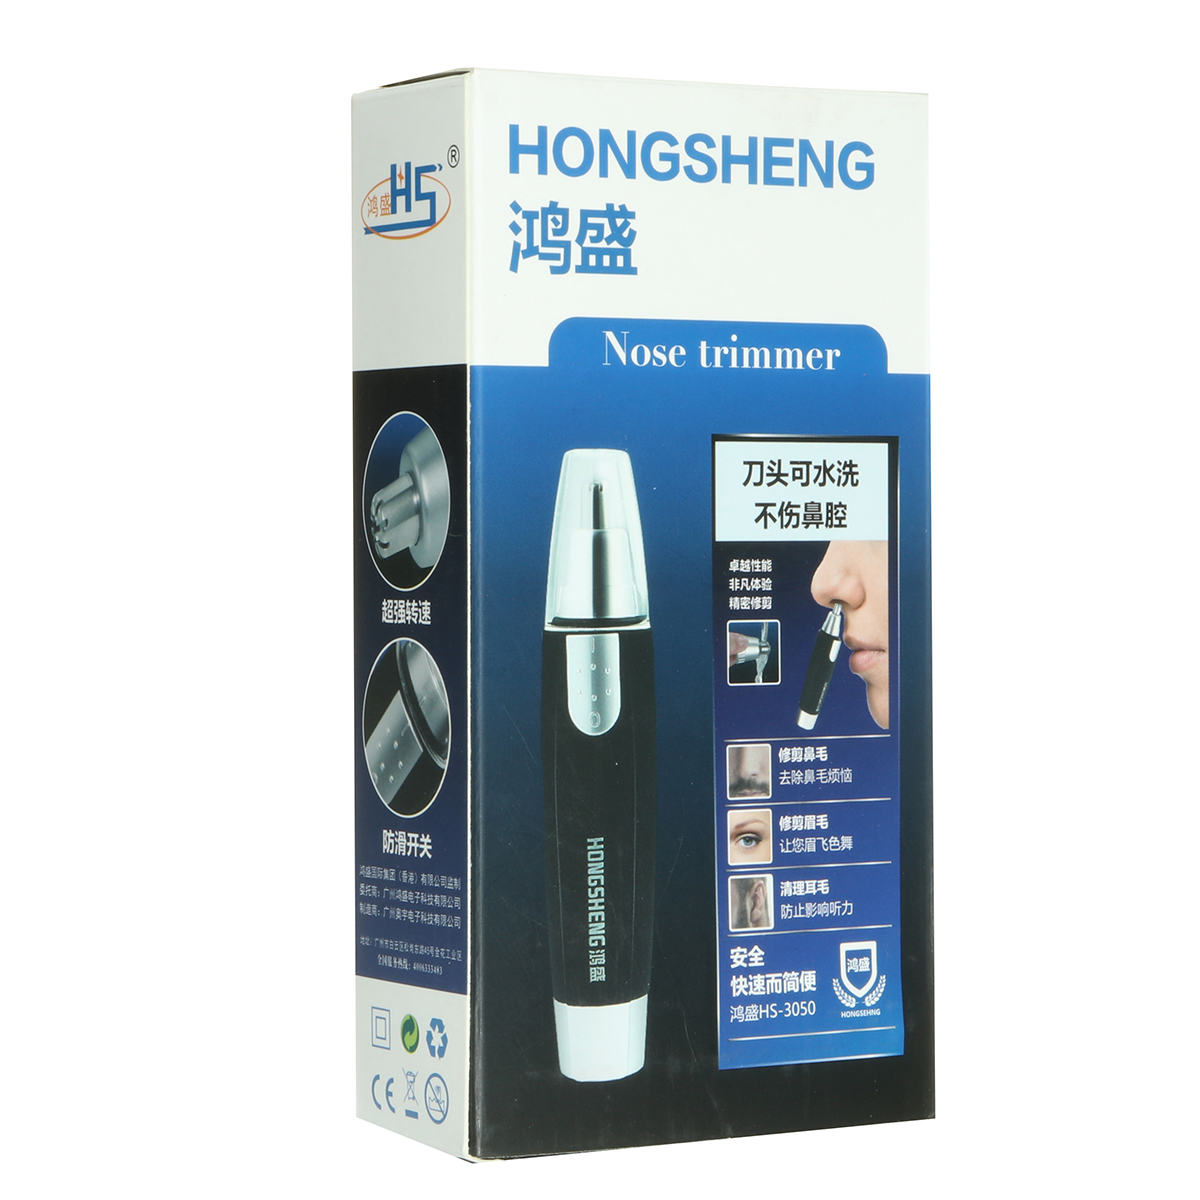 Personal-Trimmer-Nose-Hair-Ear-Eyebrow-Neck-Remover-Groomer-Micro-Shaver-Touch-1606035-10